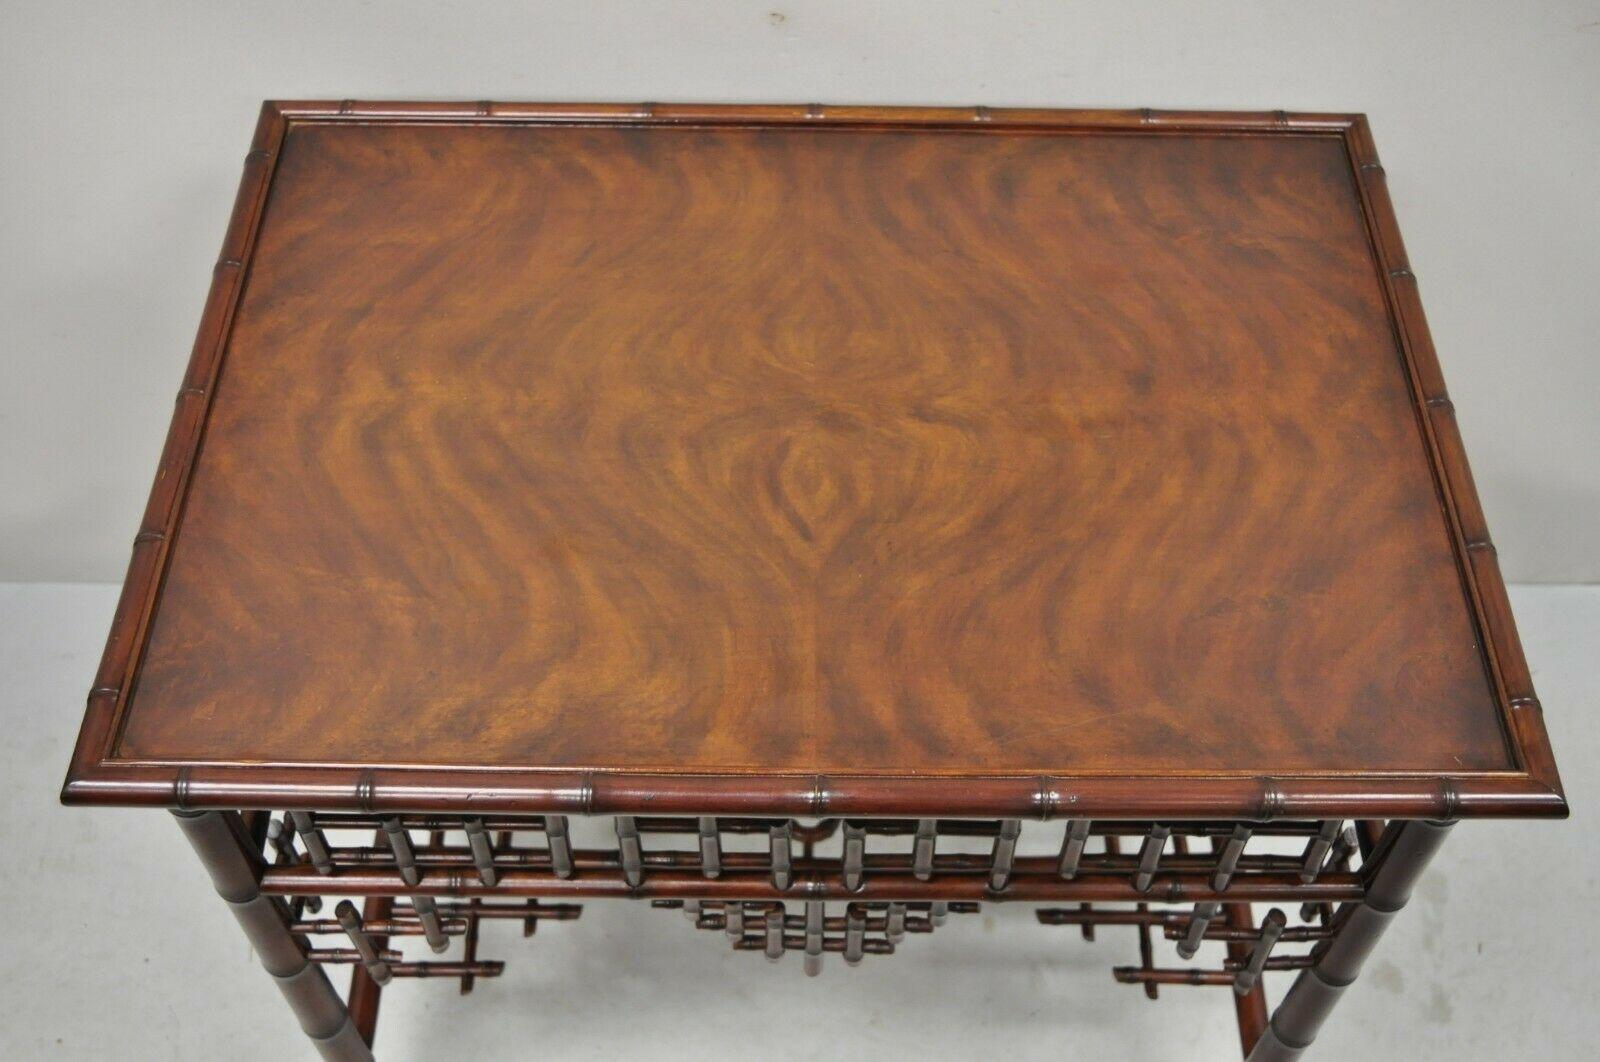 20th Century Ralph Lauren Home Indian Cove Lodge Fretwork Faux Bamboo Chinoiserie Side Table